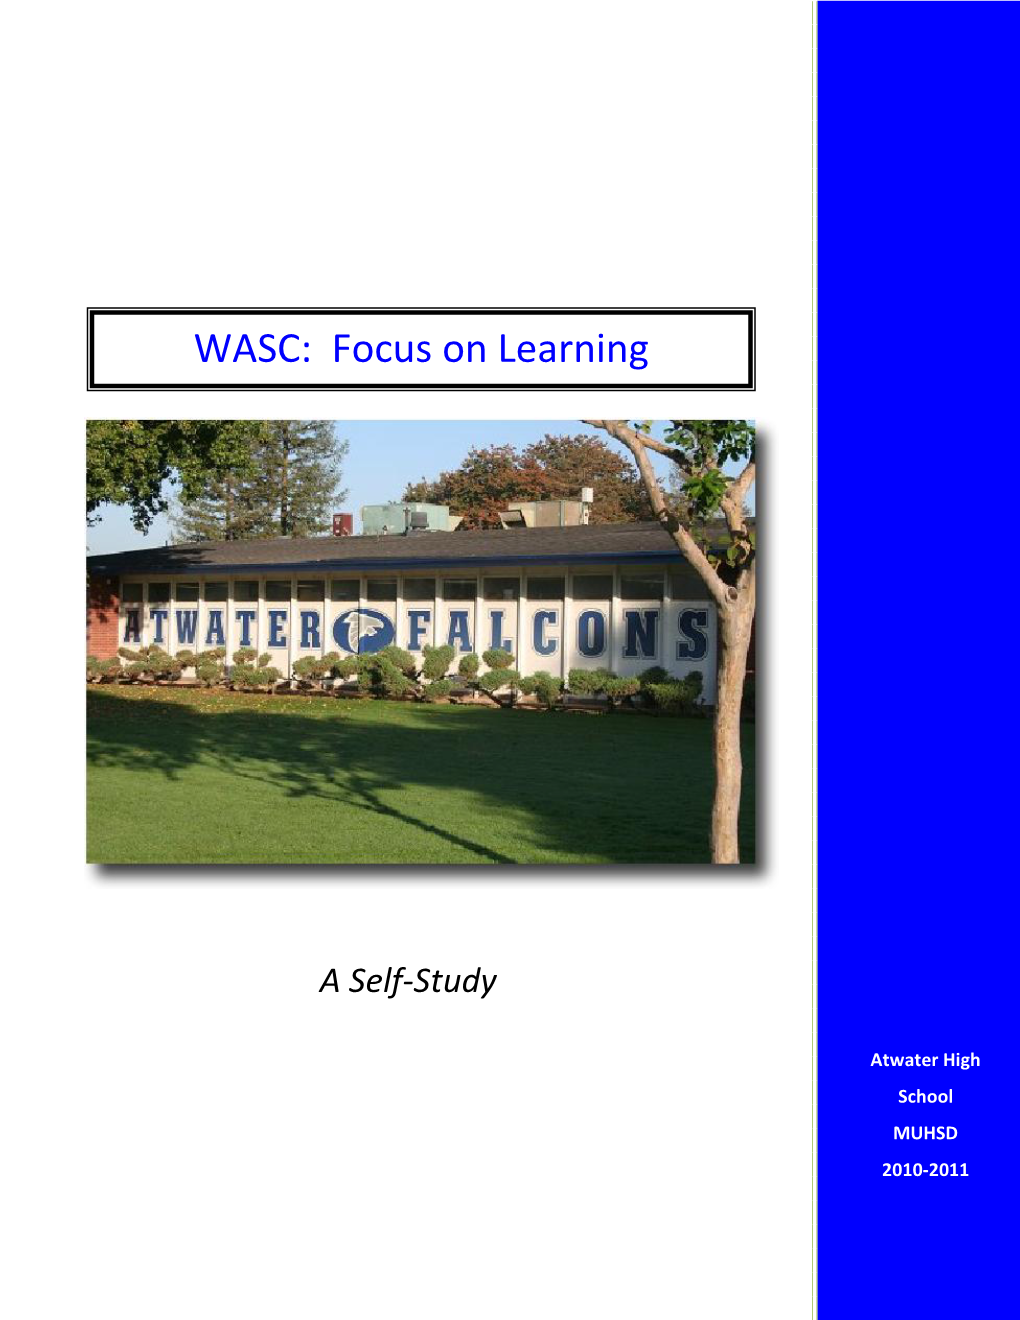 WASC: Focus on Learning